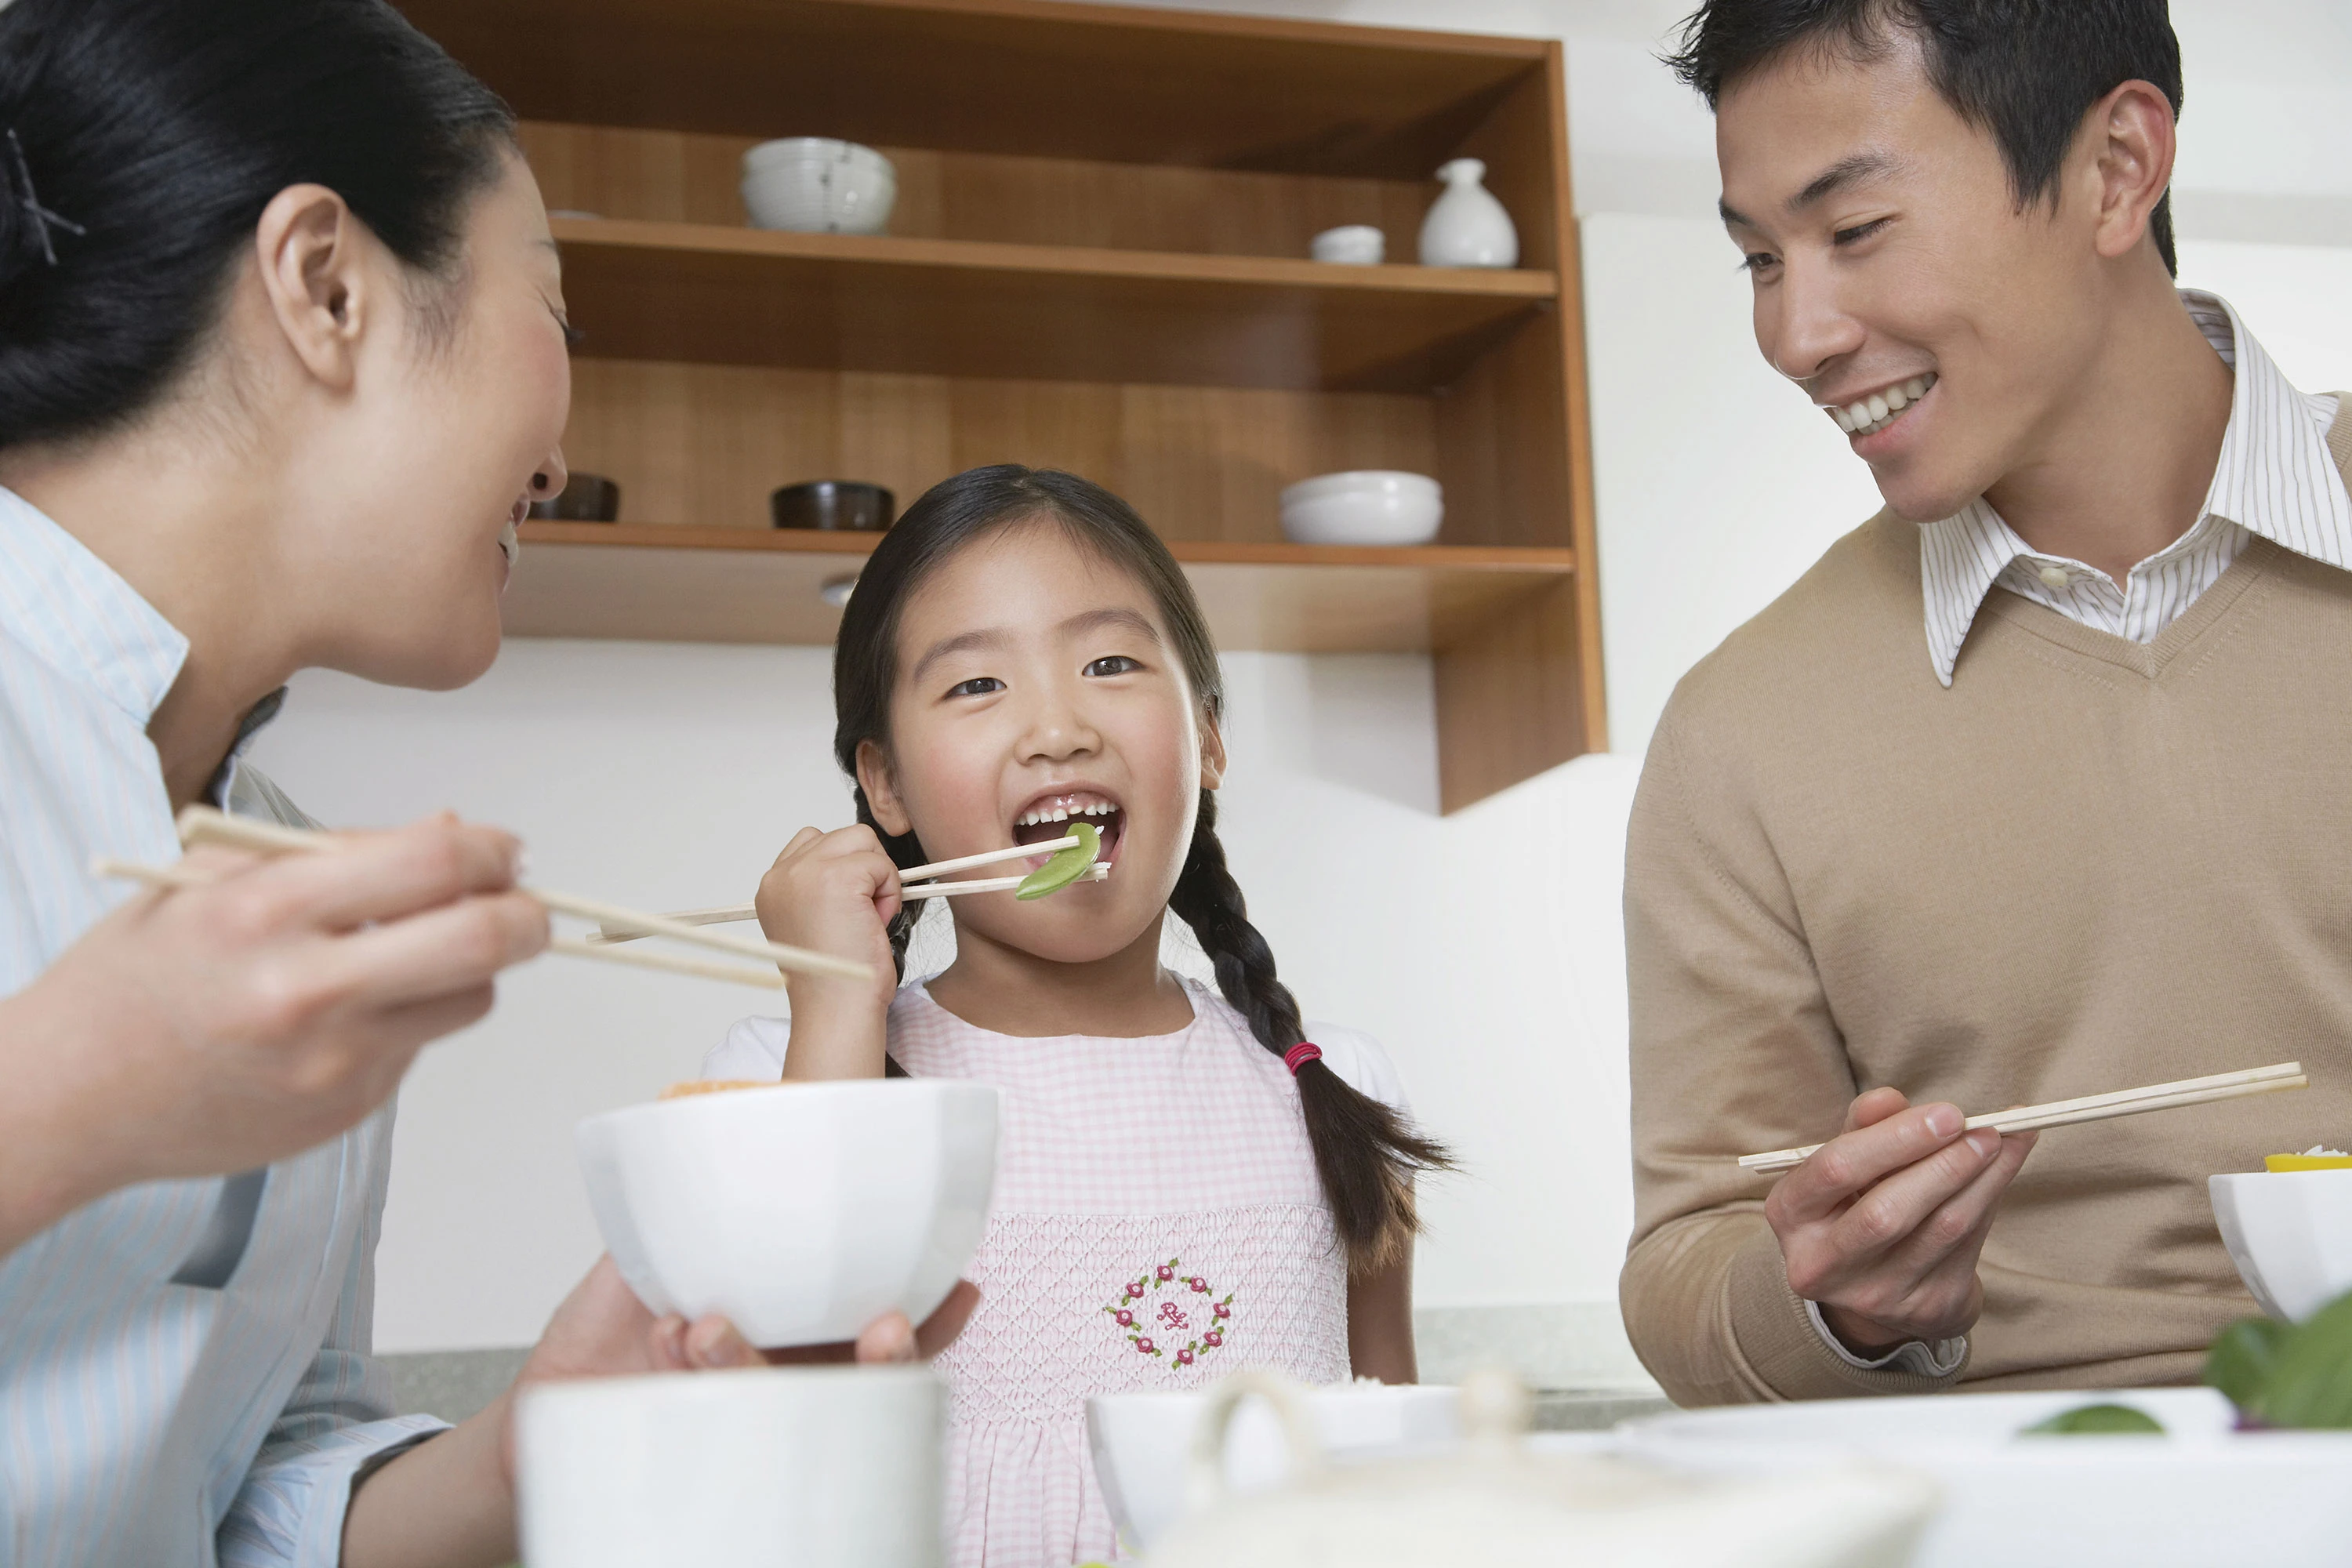 family of three having a meal at home with girl putting vegetable into her mouth